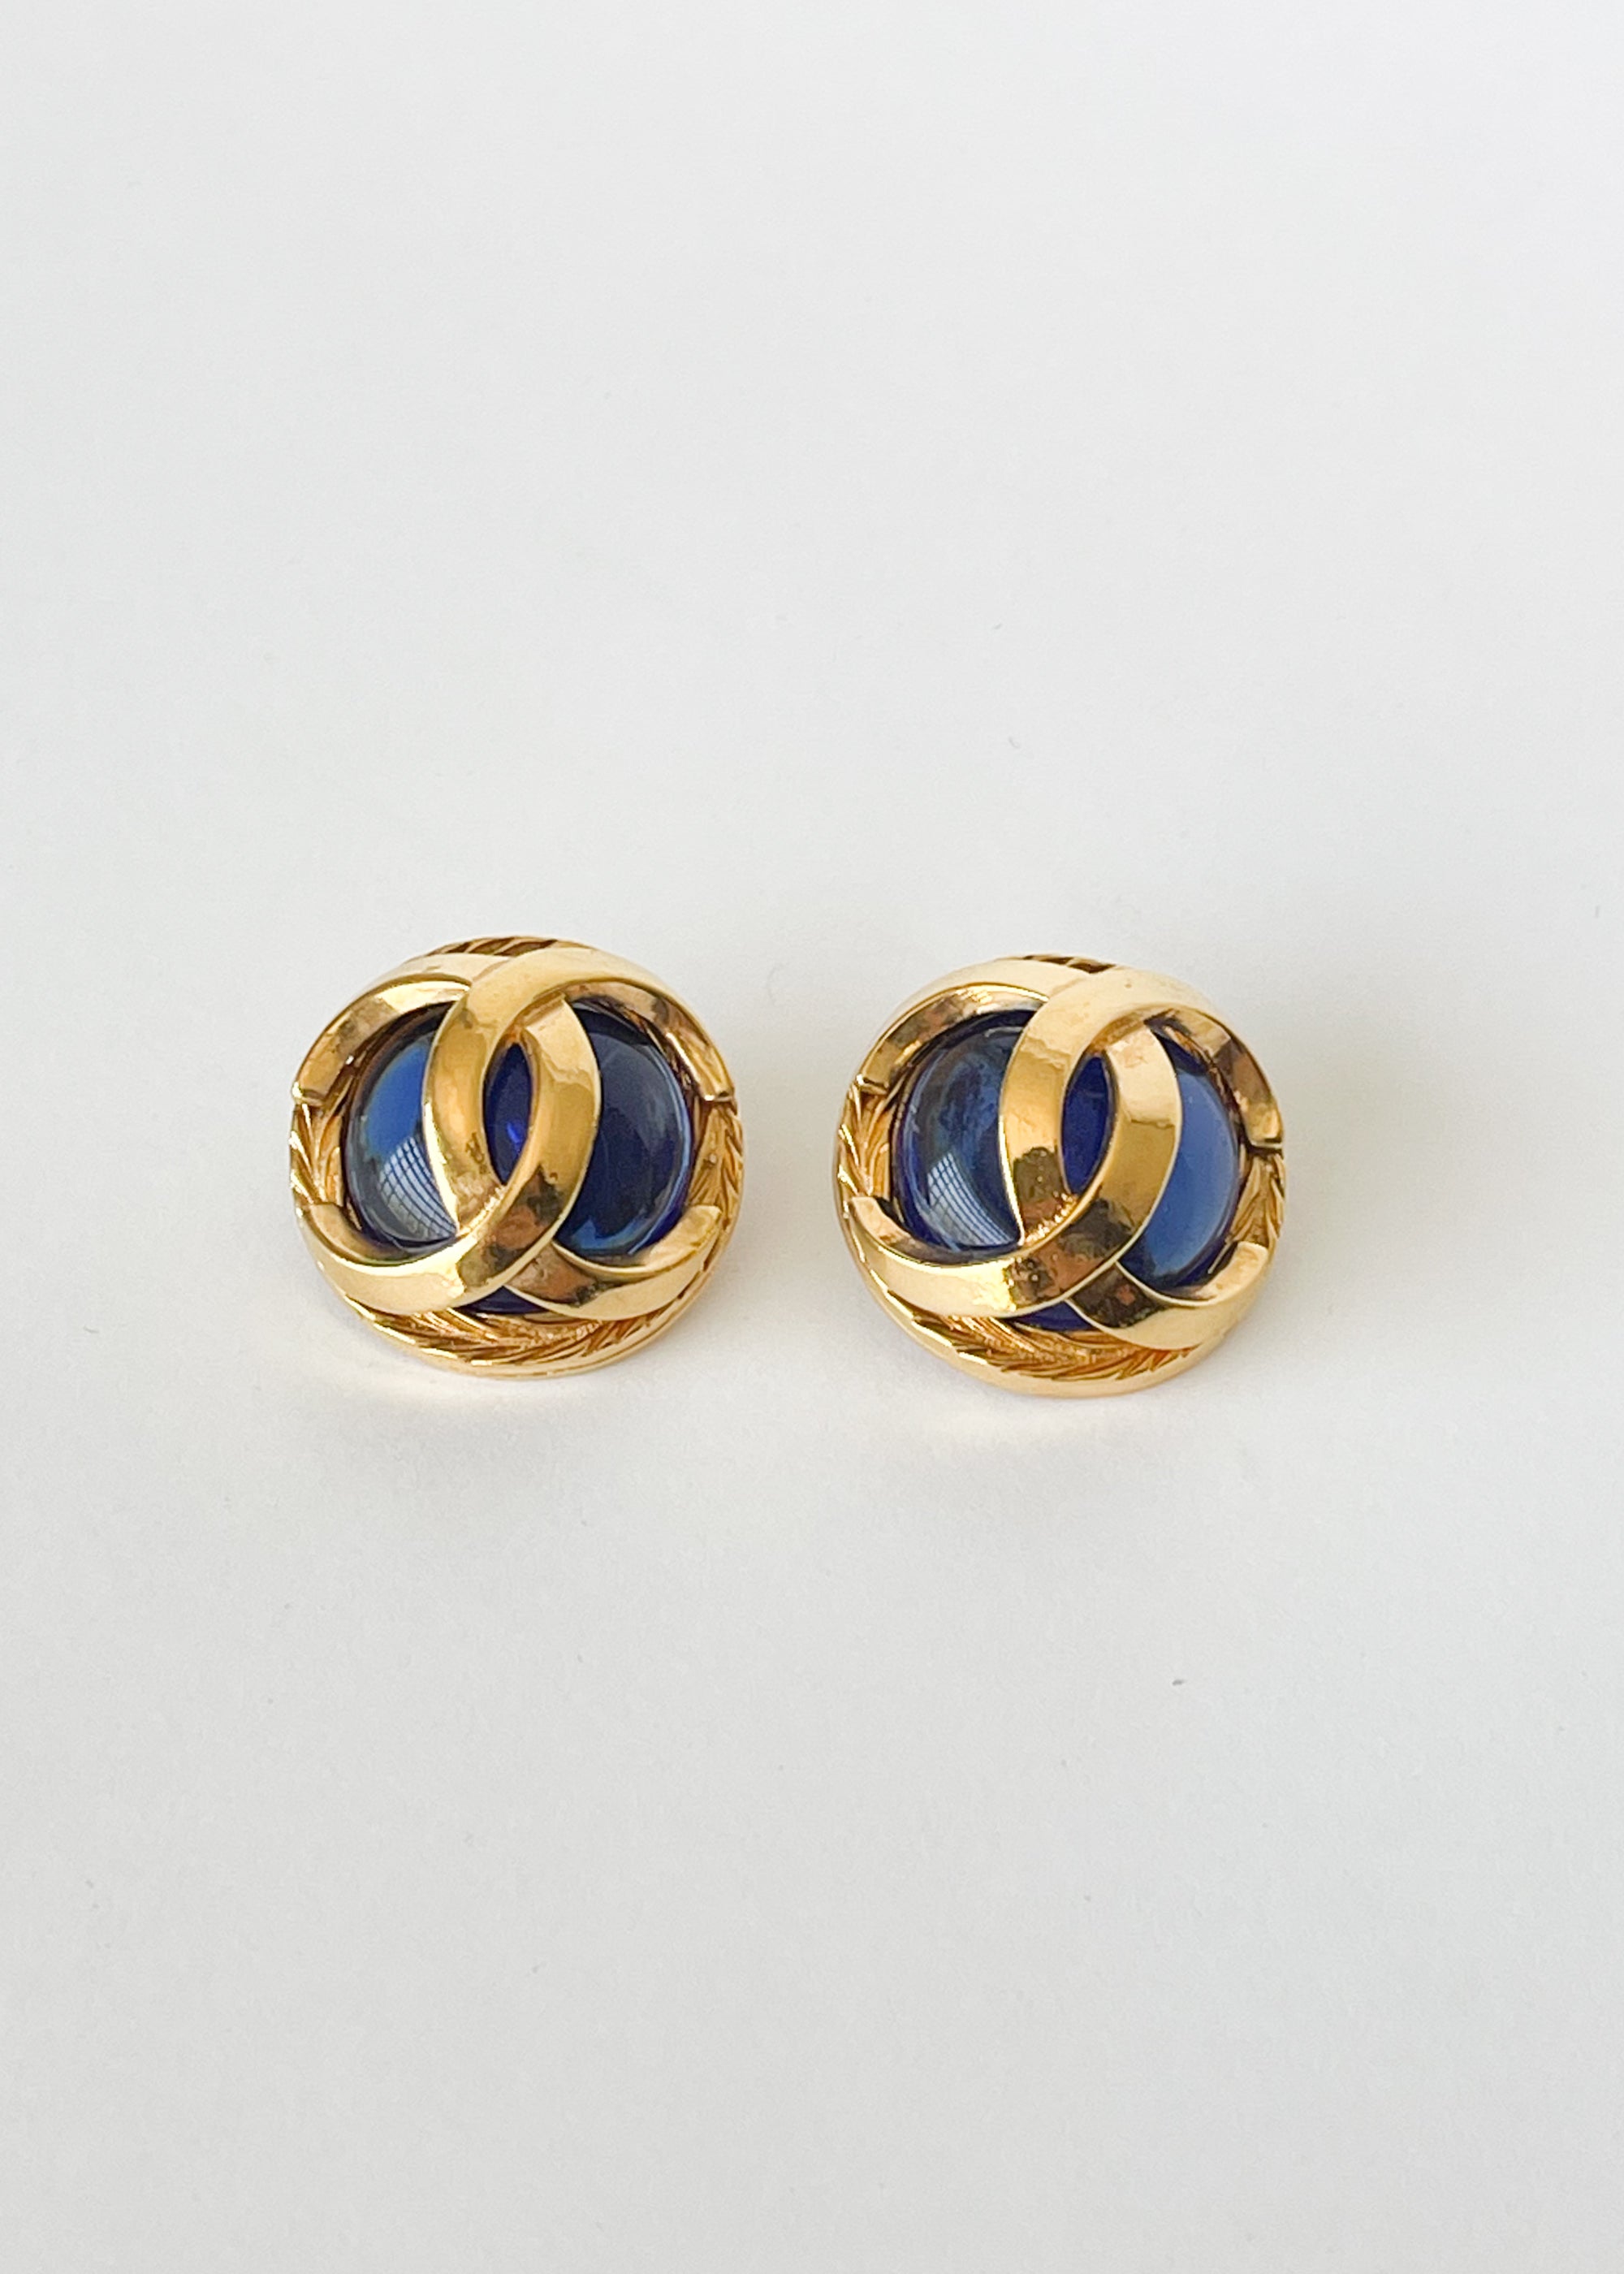 Vintage Chanel Blue Glass CC Clip Earrings - Raleigh Vintage